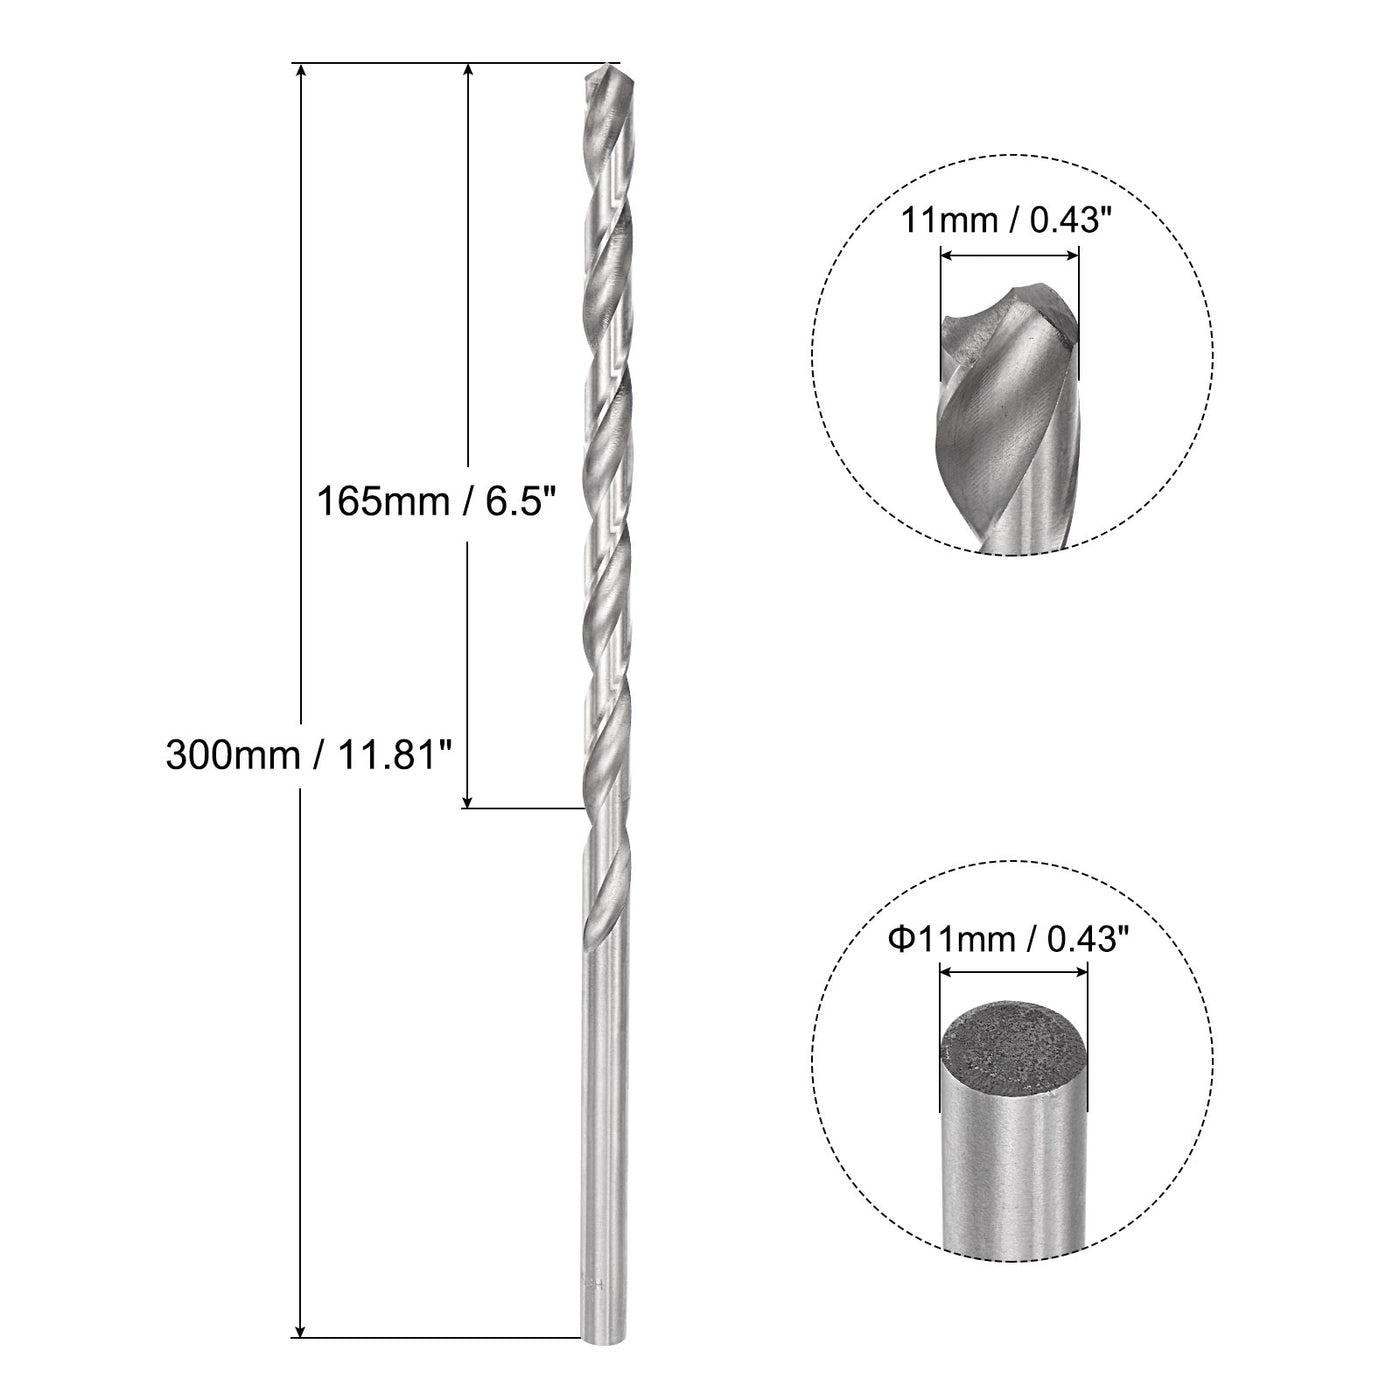 uxcell Uxcell 11mm Twist Drill Bits, High-Speed Steel Extra Long Drill Bit 300mm Length